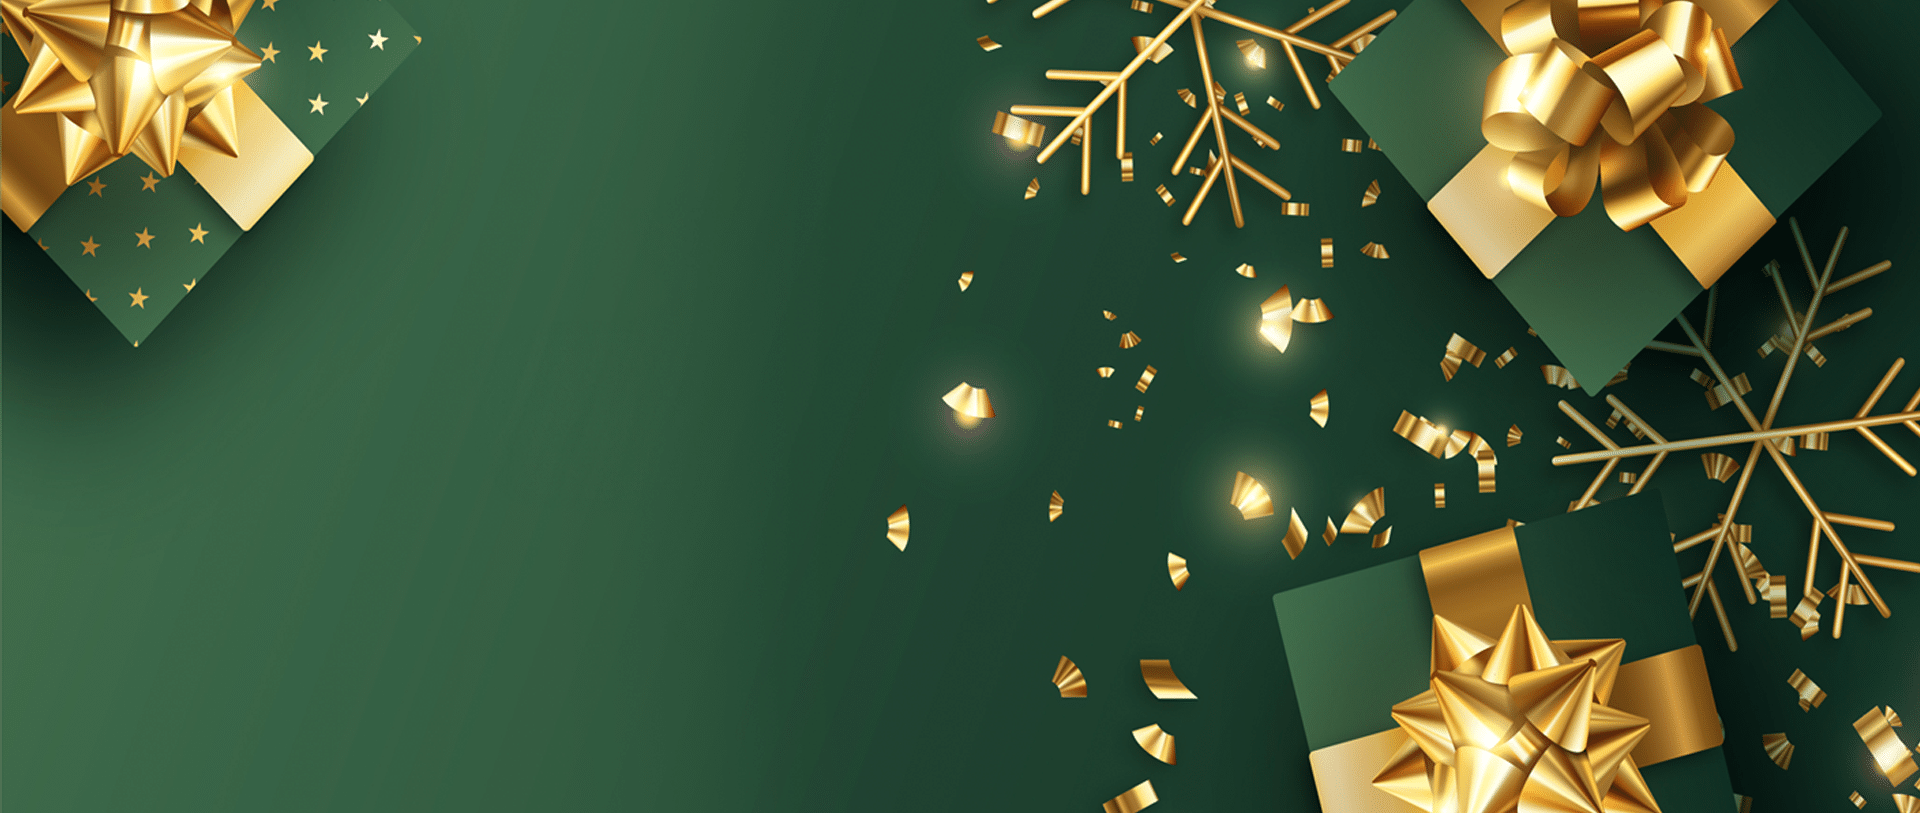 green background with gold presents